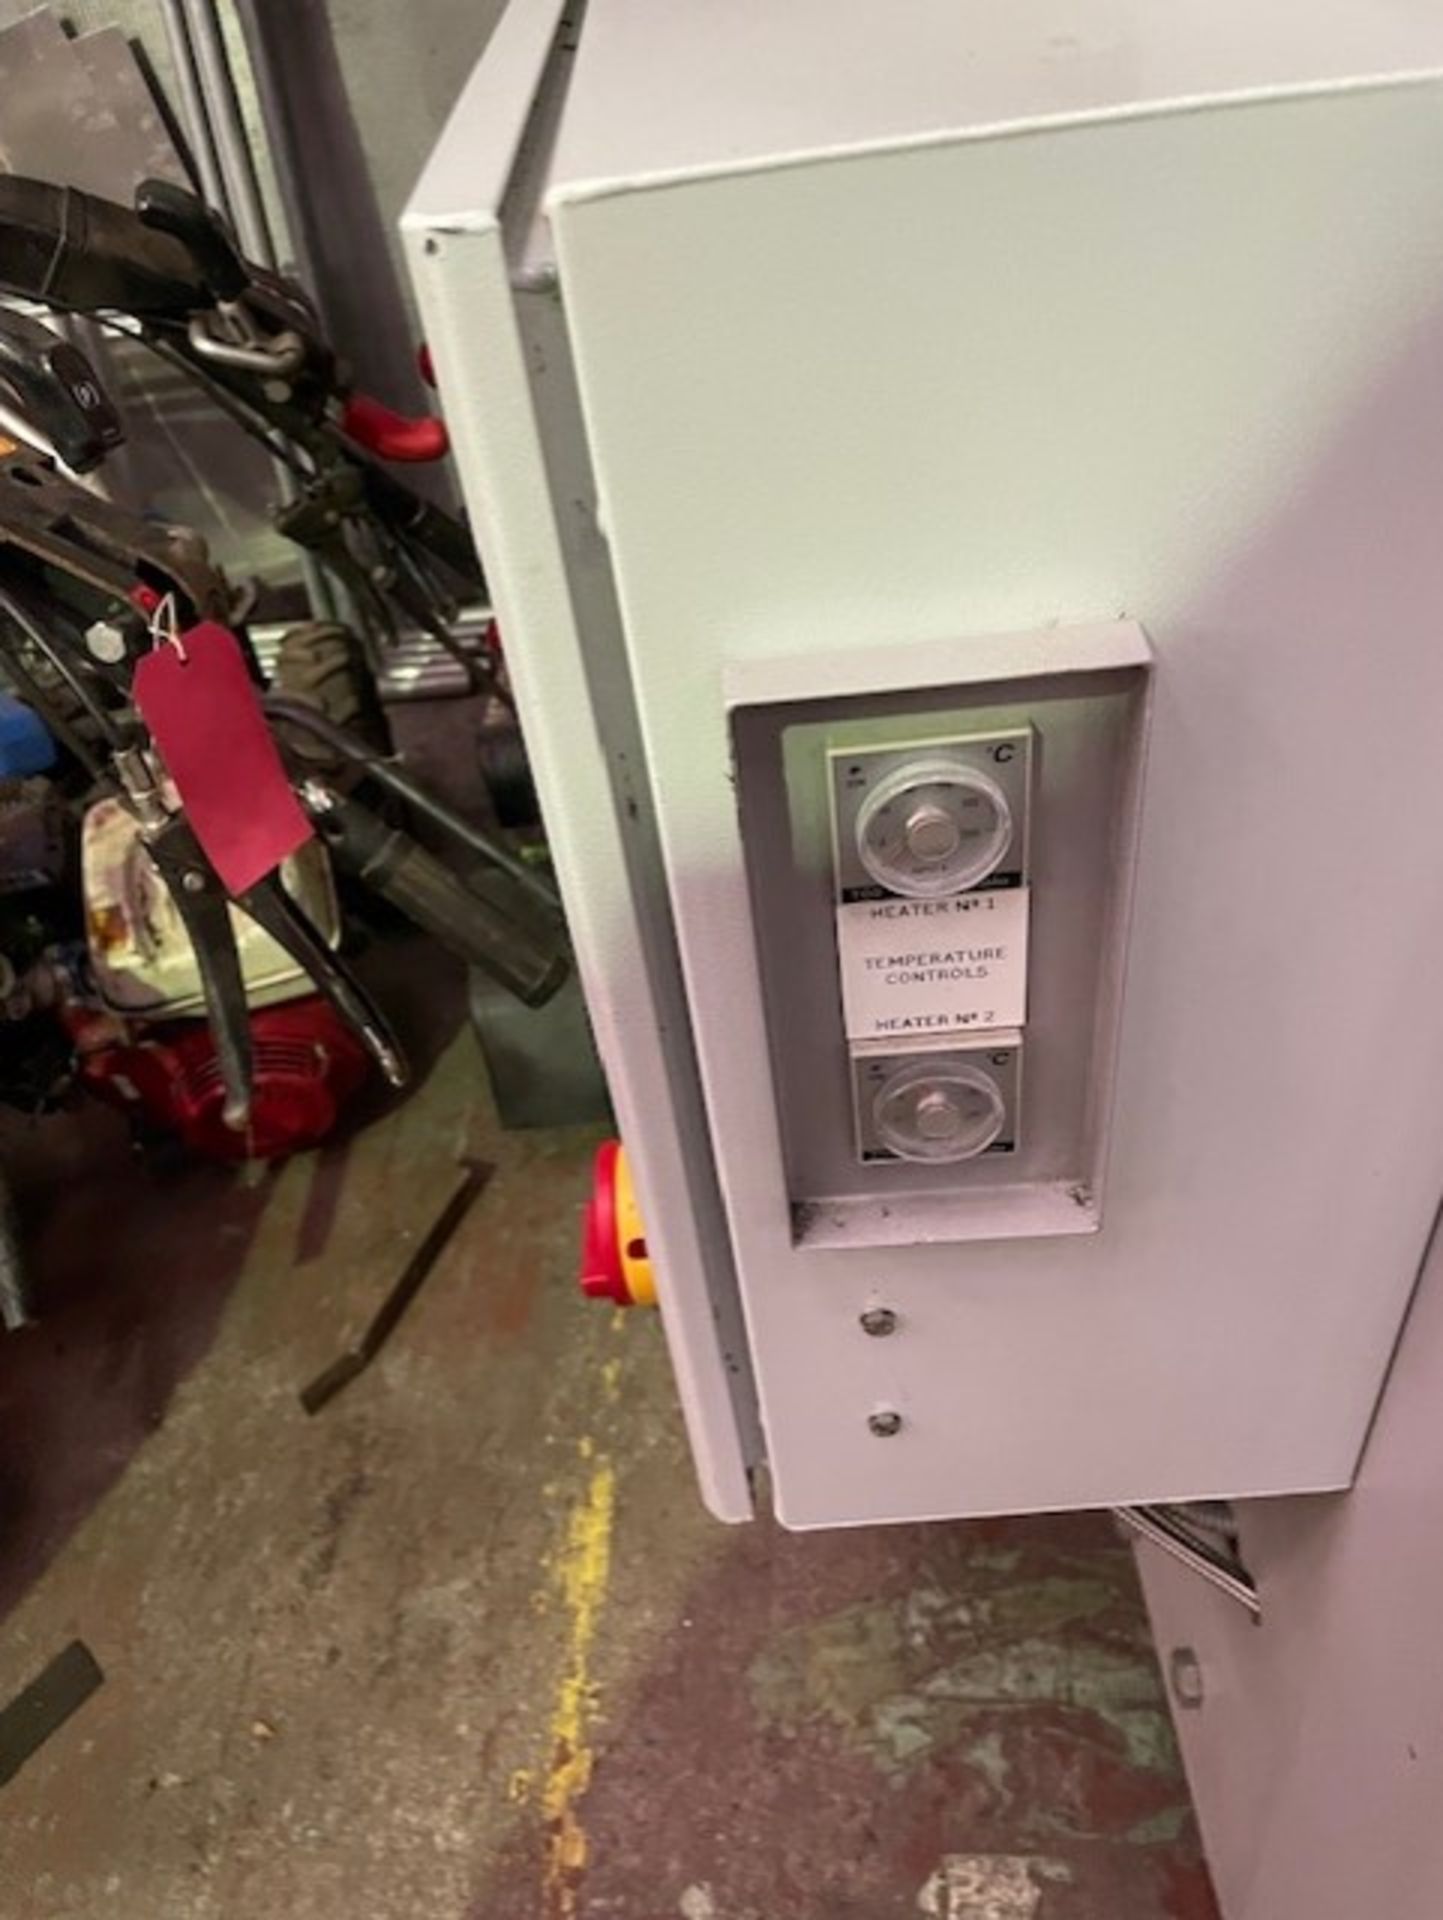 Laundry press it’s a BMM Weston it’s 3 phase electric it’s in good condition and it’s a commercial - Bild 3 aus 7